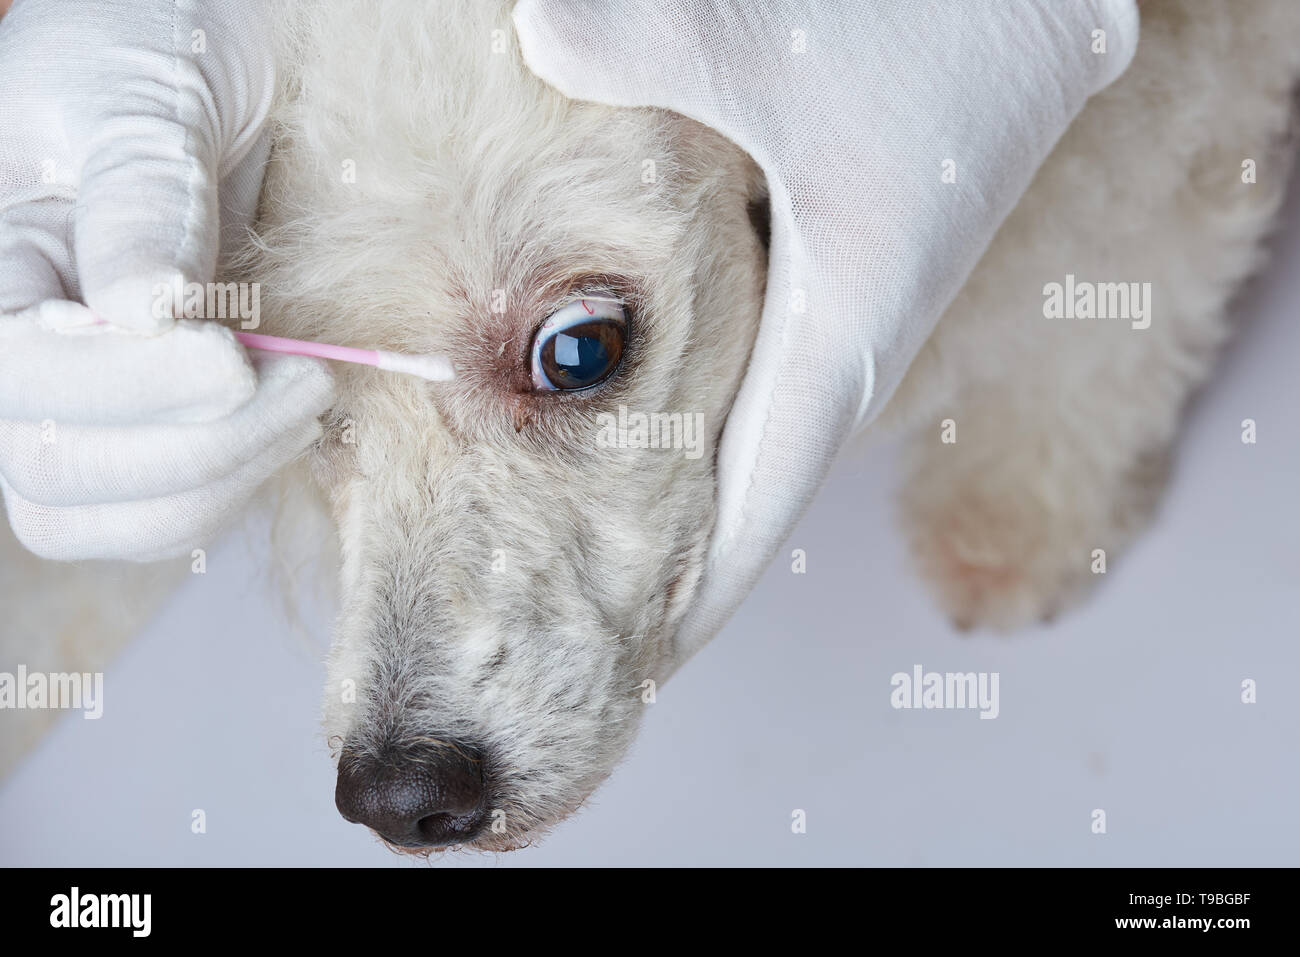 Vet doctor hand with swab cleaning dog eye Stock Photo - Alamy